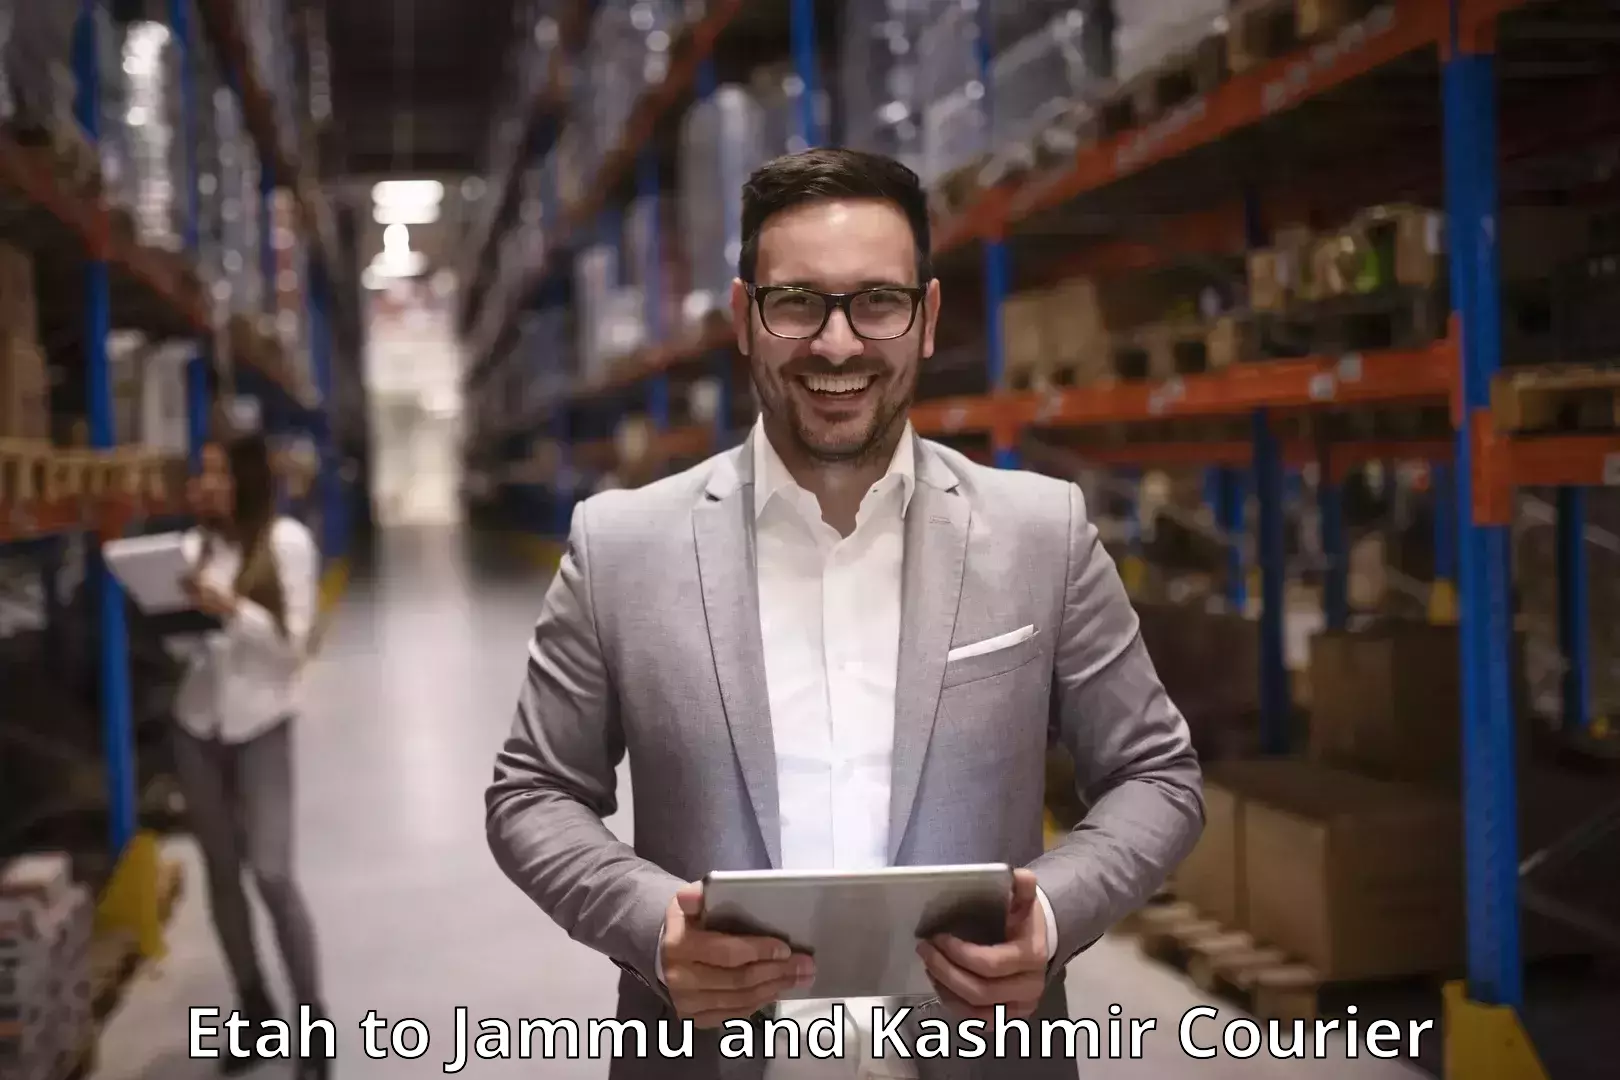 International courier networks Etah to Pulwama